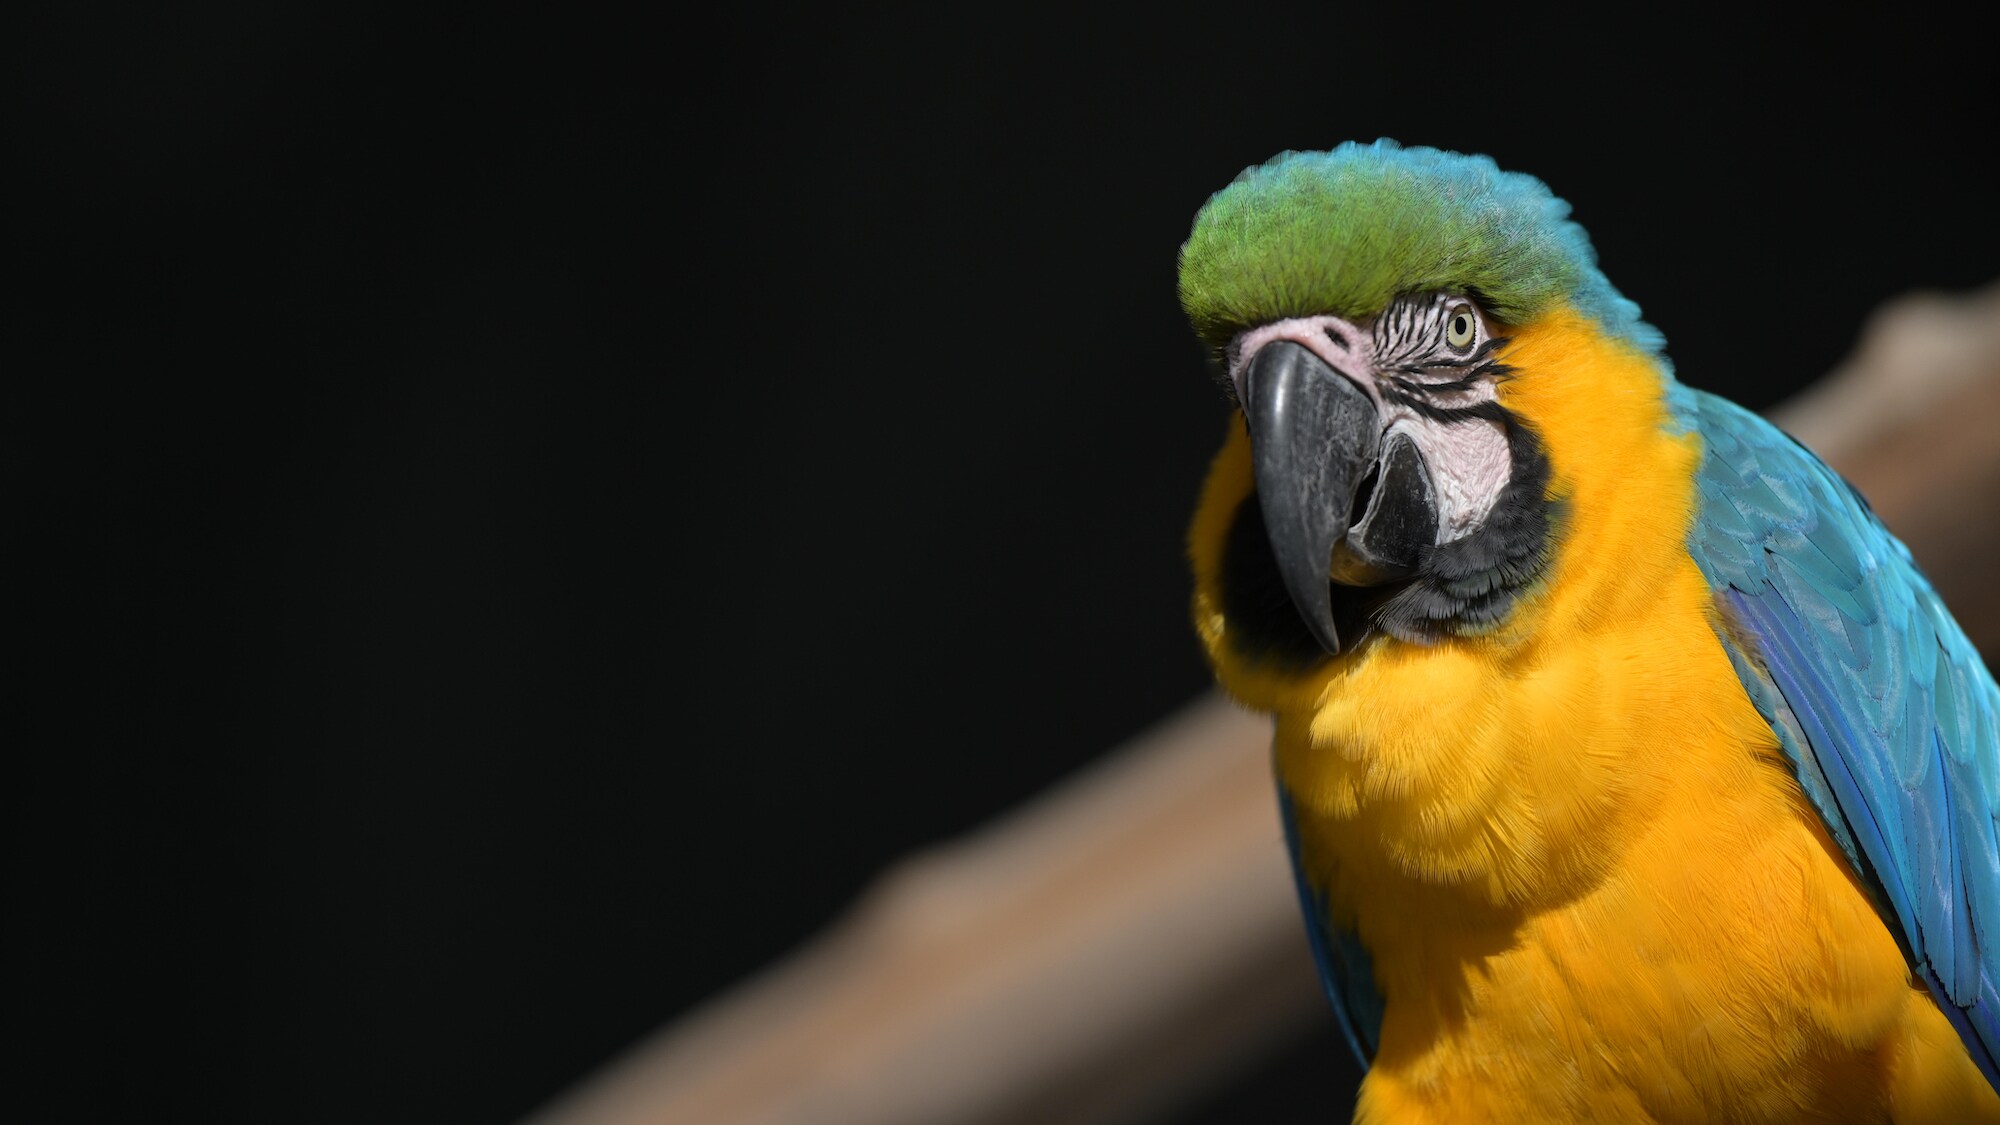 Castle, a Blue and Gold Macaw. (Charlene Guilliams/Disney)